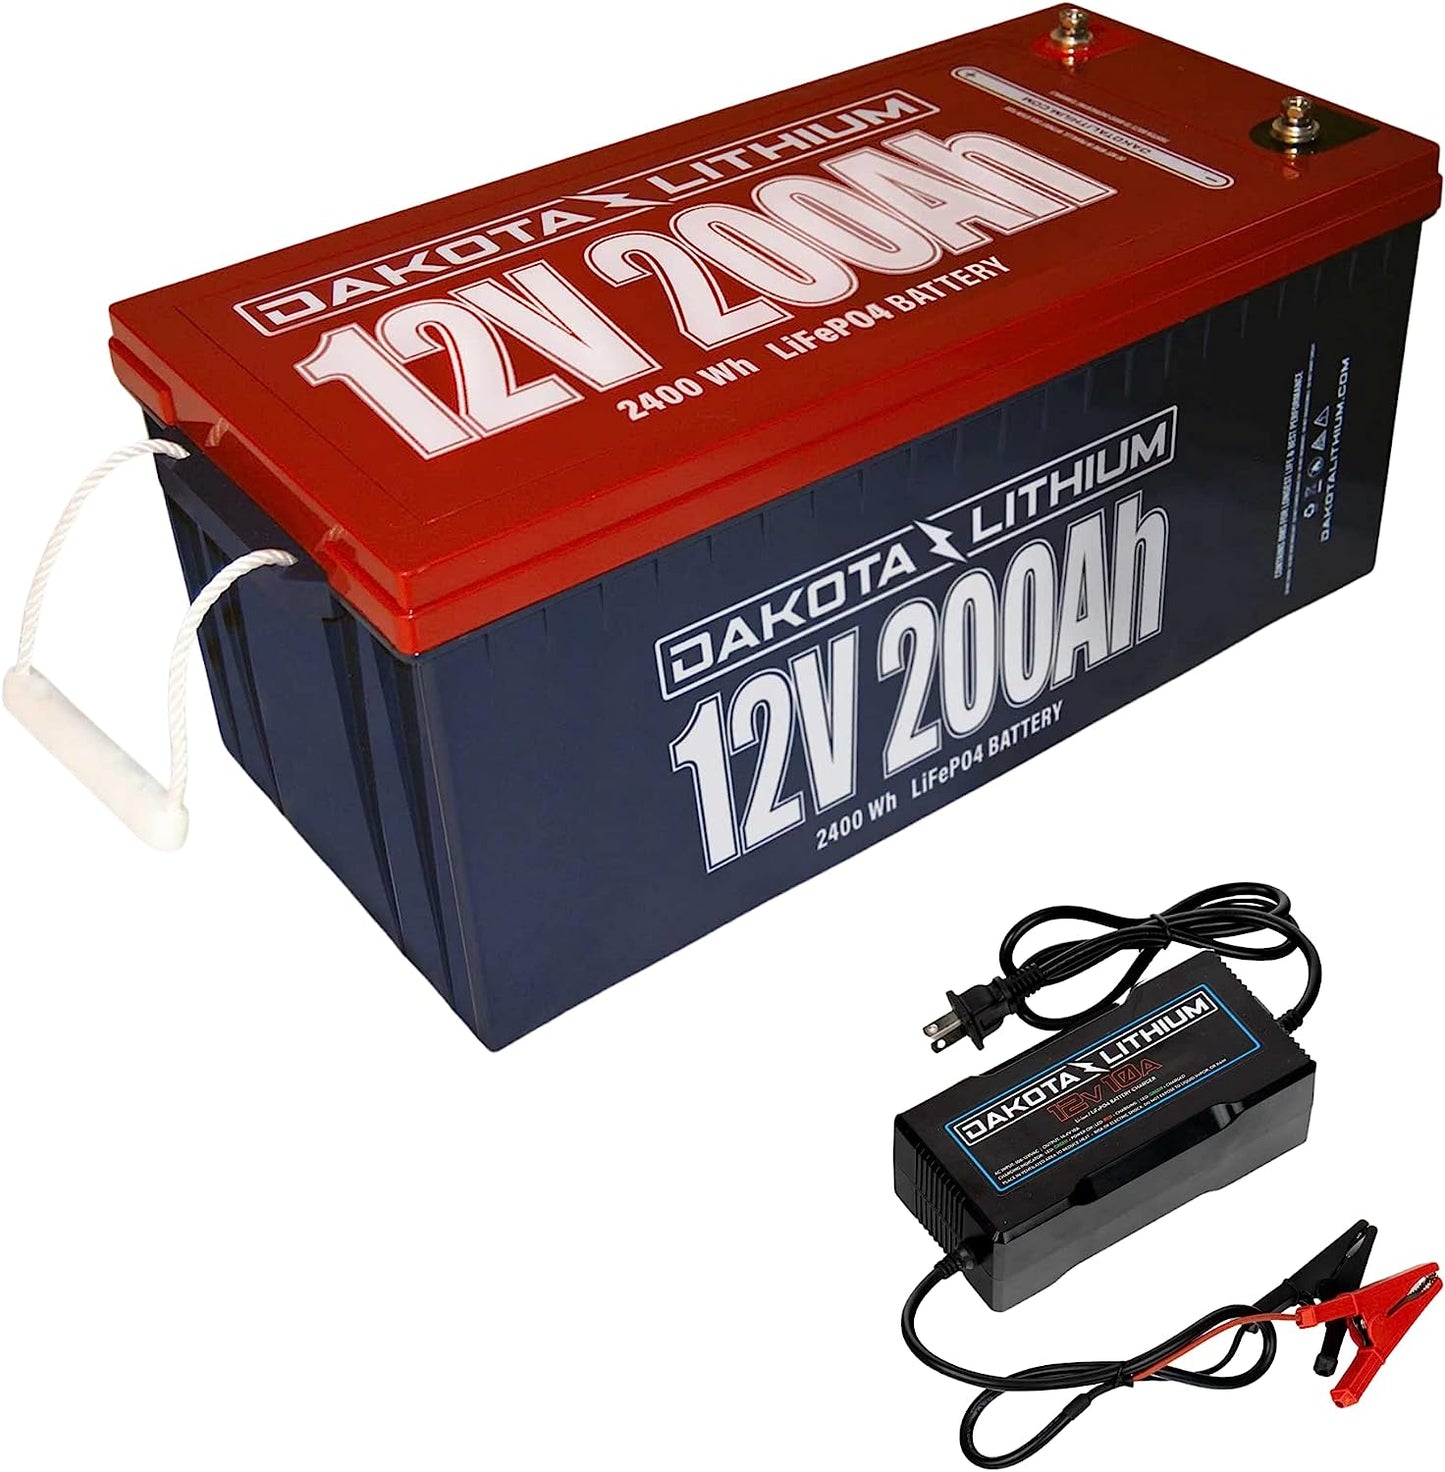 Dakota Lithium - 12V 200Ah LiFePO4 Deep Cycle Battery with Charger - 11 Year USA Warranty, 2000+ Cycles - For Electric Vehicles, Marine, Solar, RVs, Golf Carts, Powerwall, Off Grid - 1 Pack